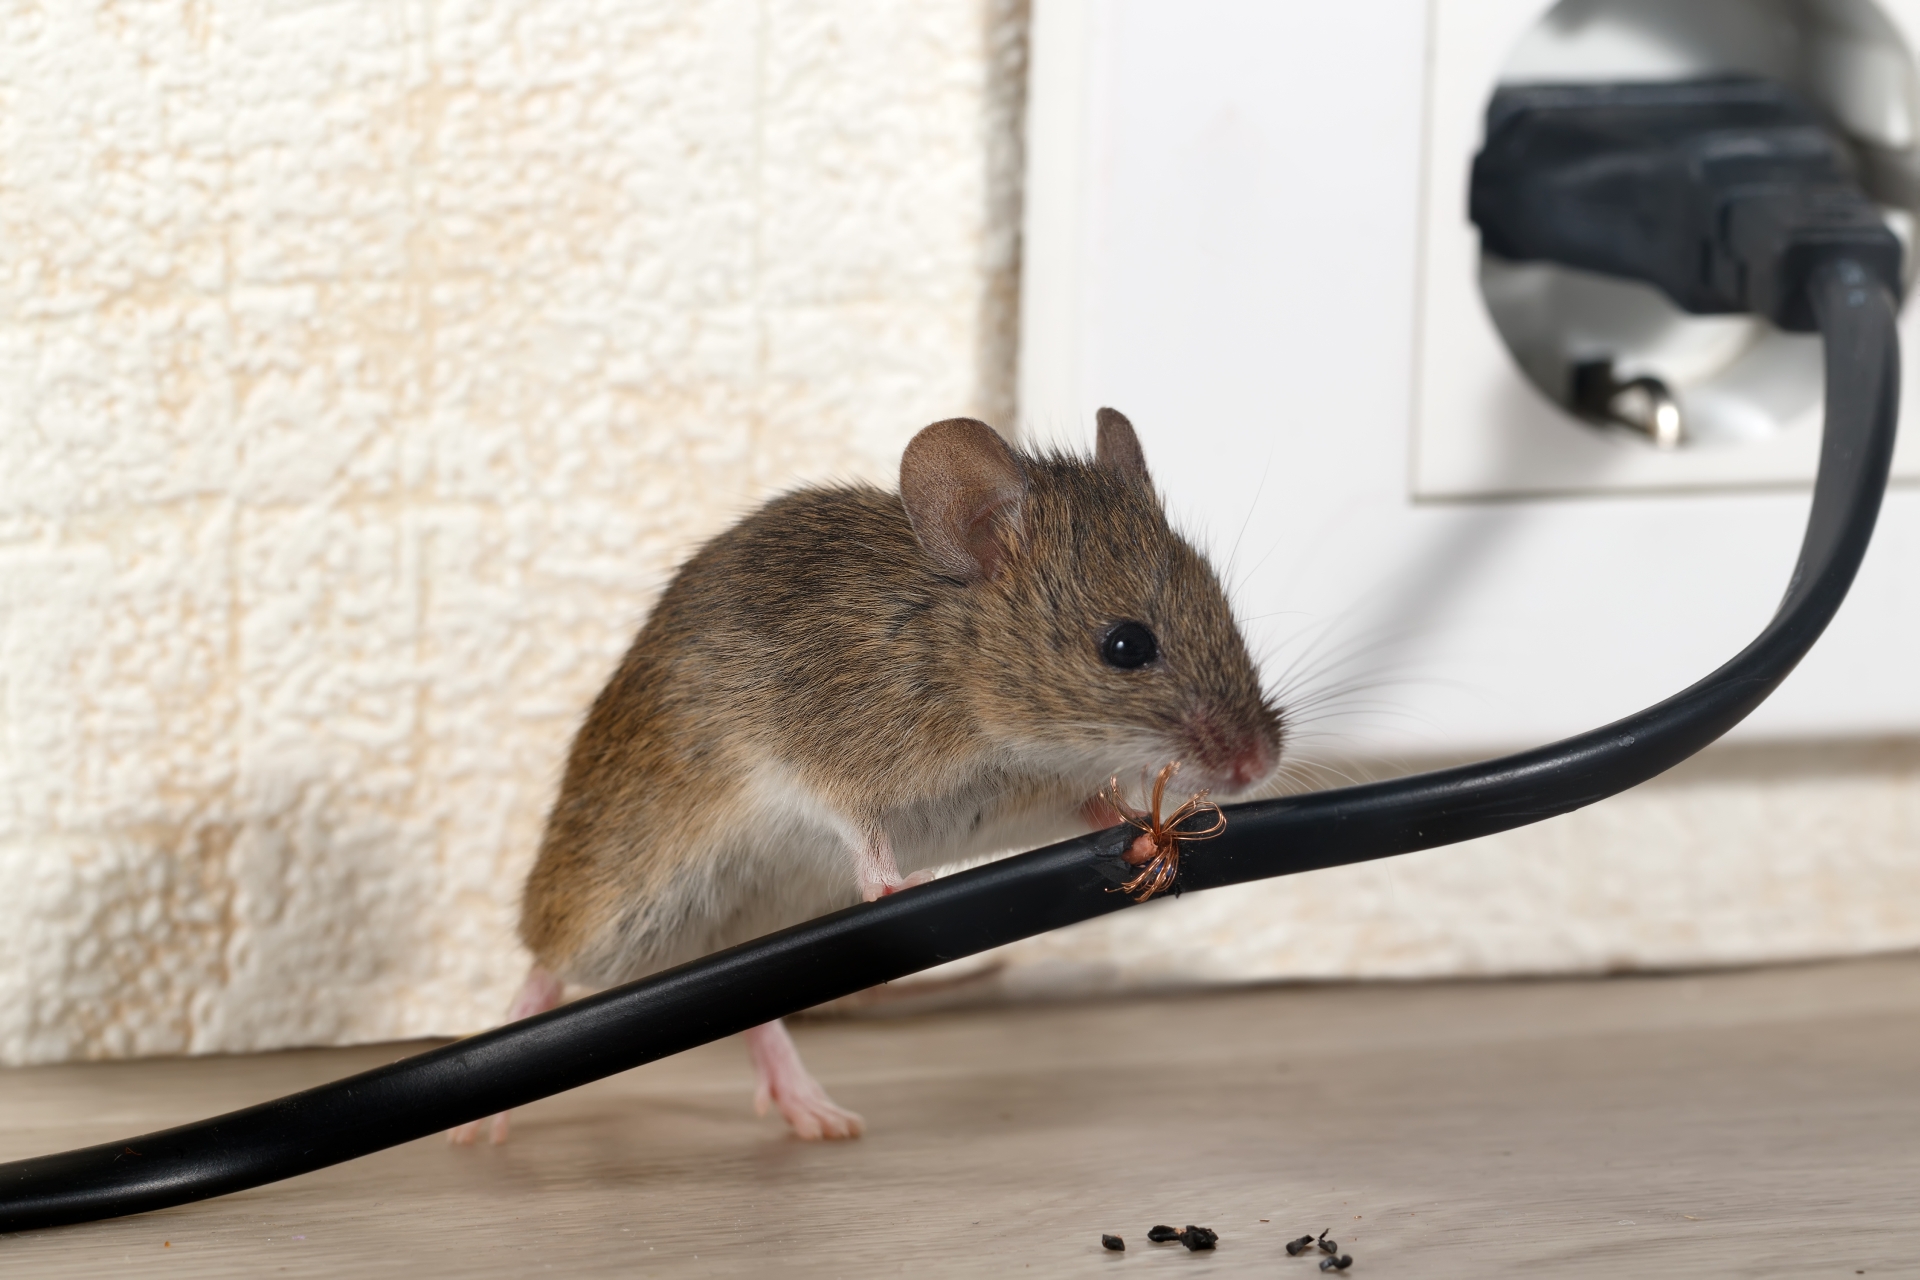 Mice Infestation, Pest Control in Havering-atte-Bower, Abridge, RM4. Call Now 020 8166 9746